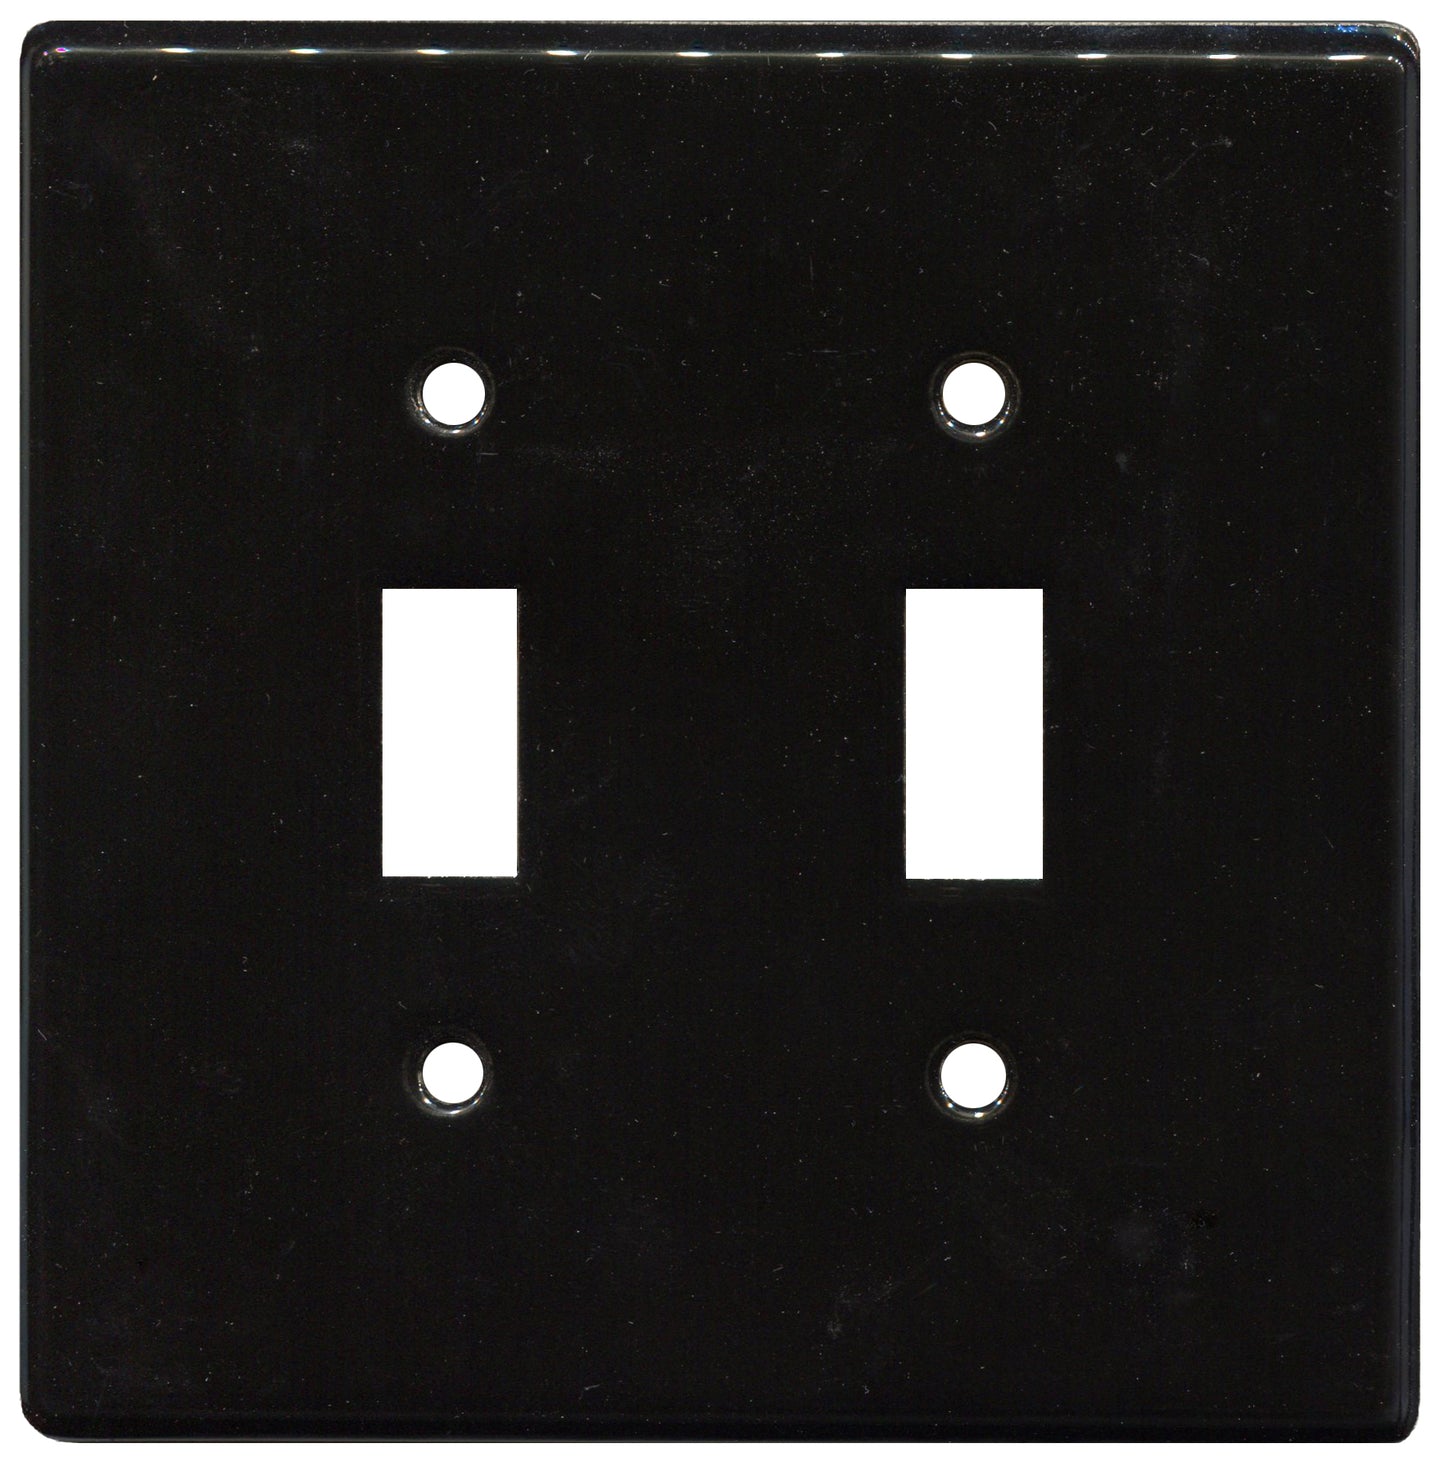 Black double switch ceramic plate